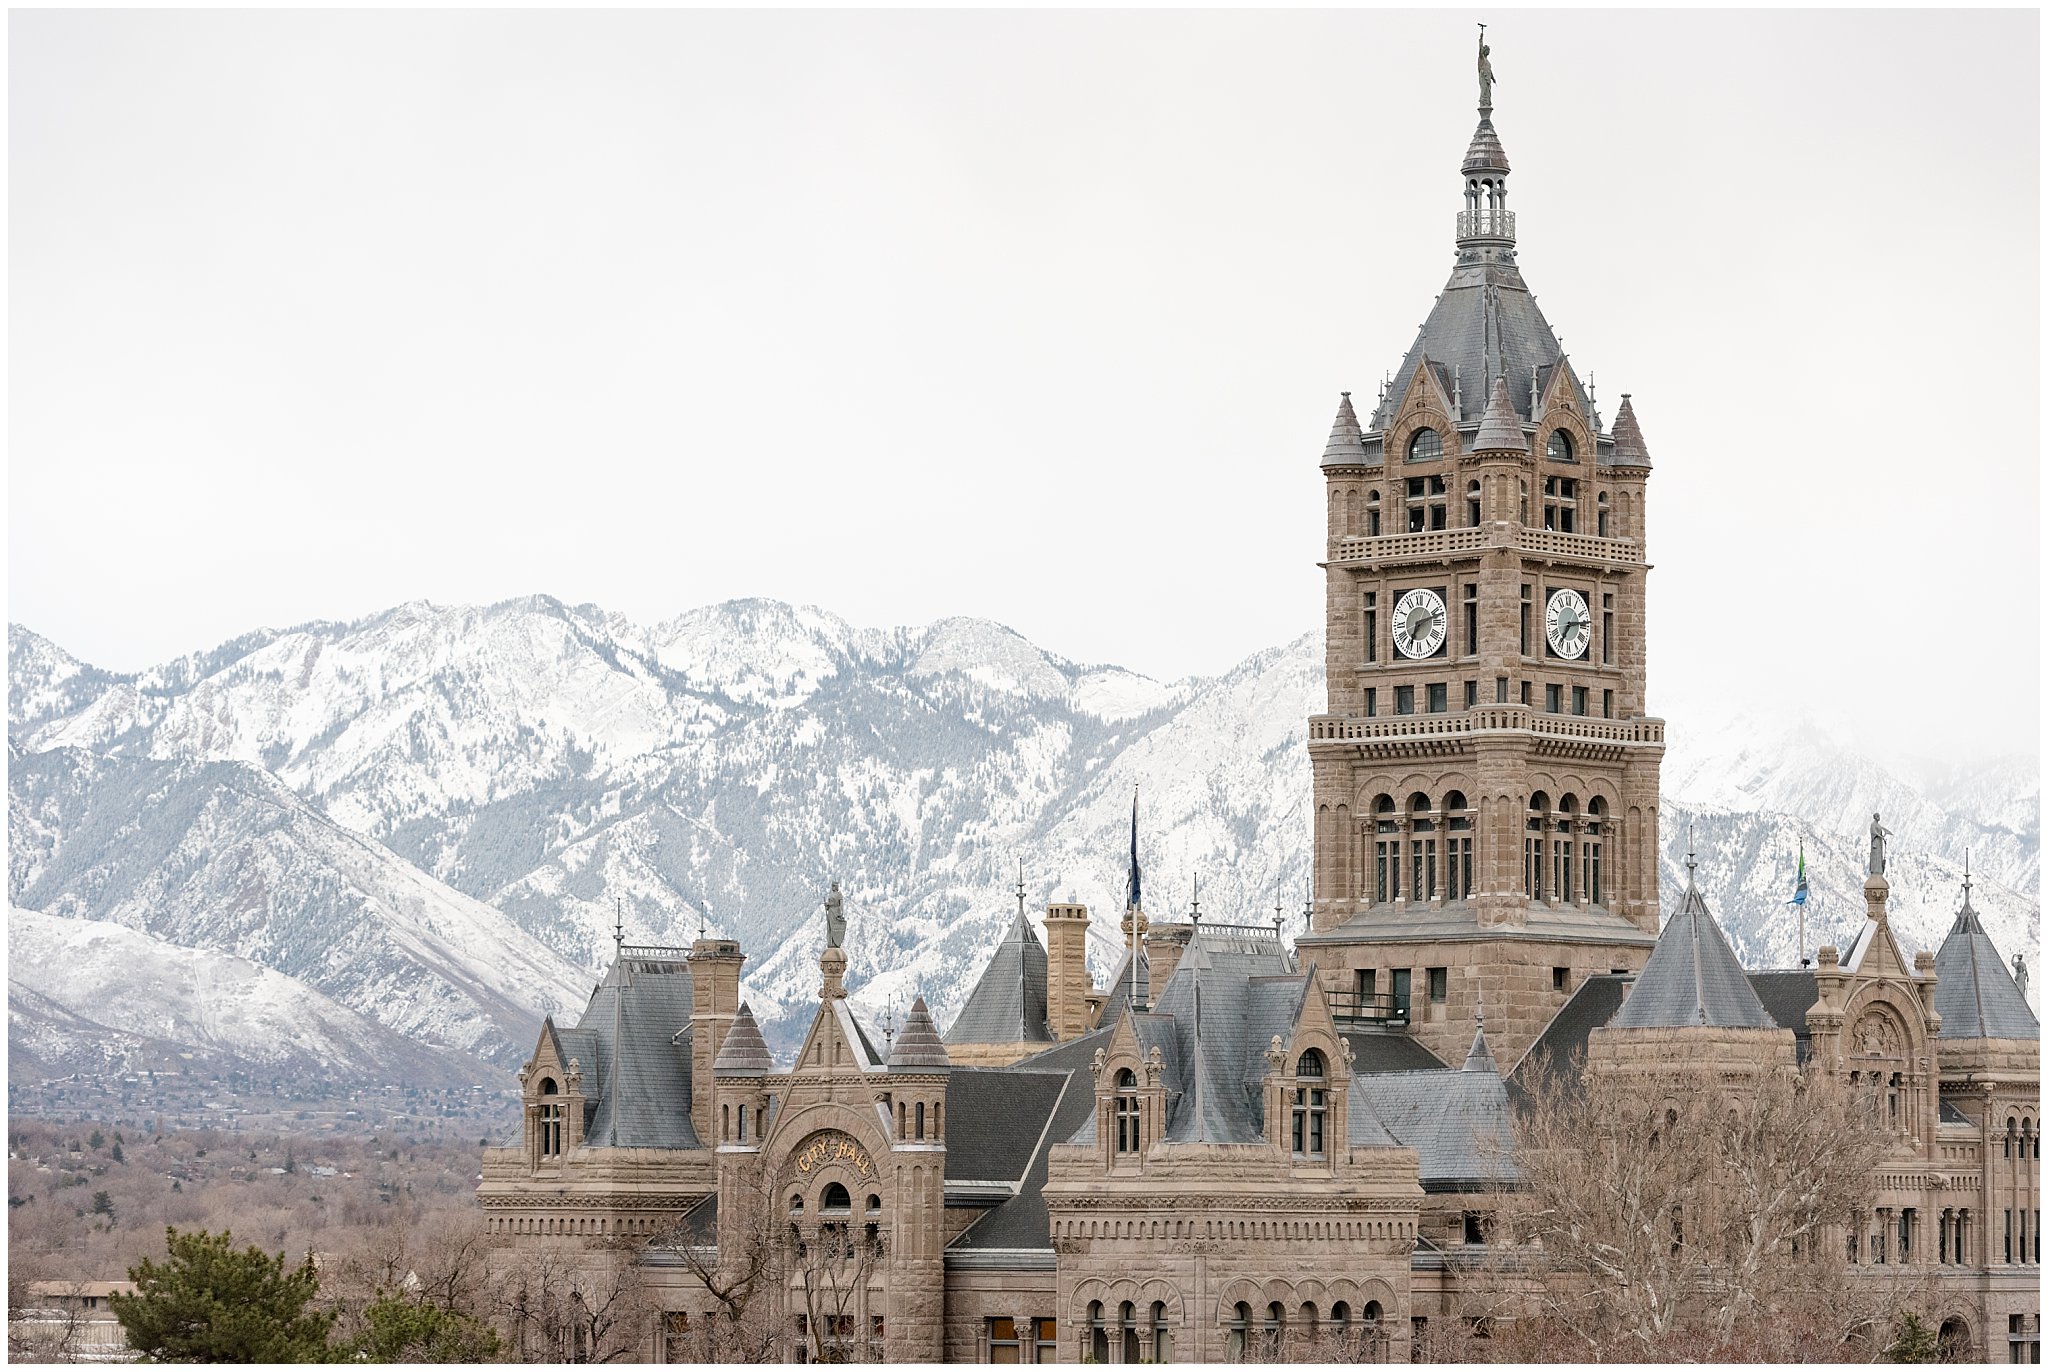 Salt Lake County Building in the Winter